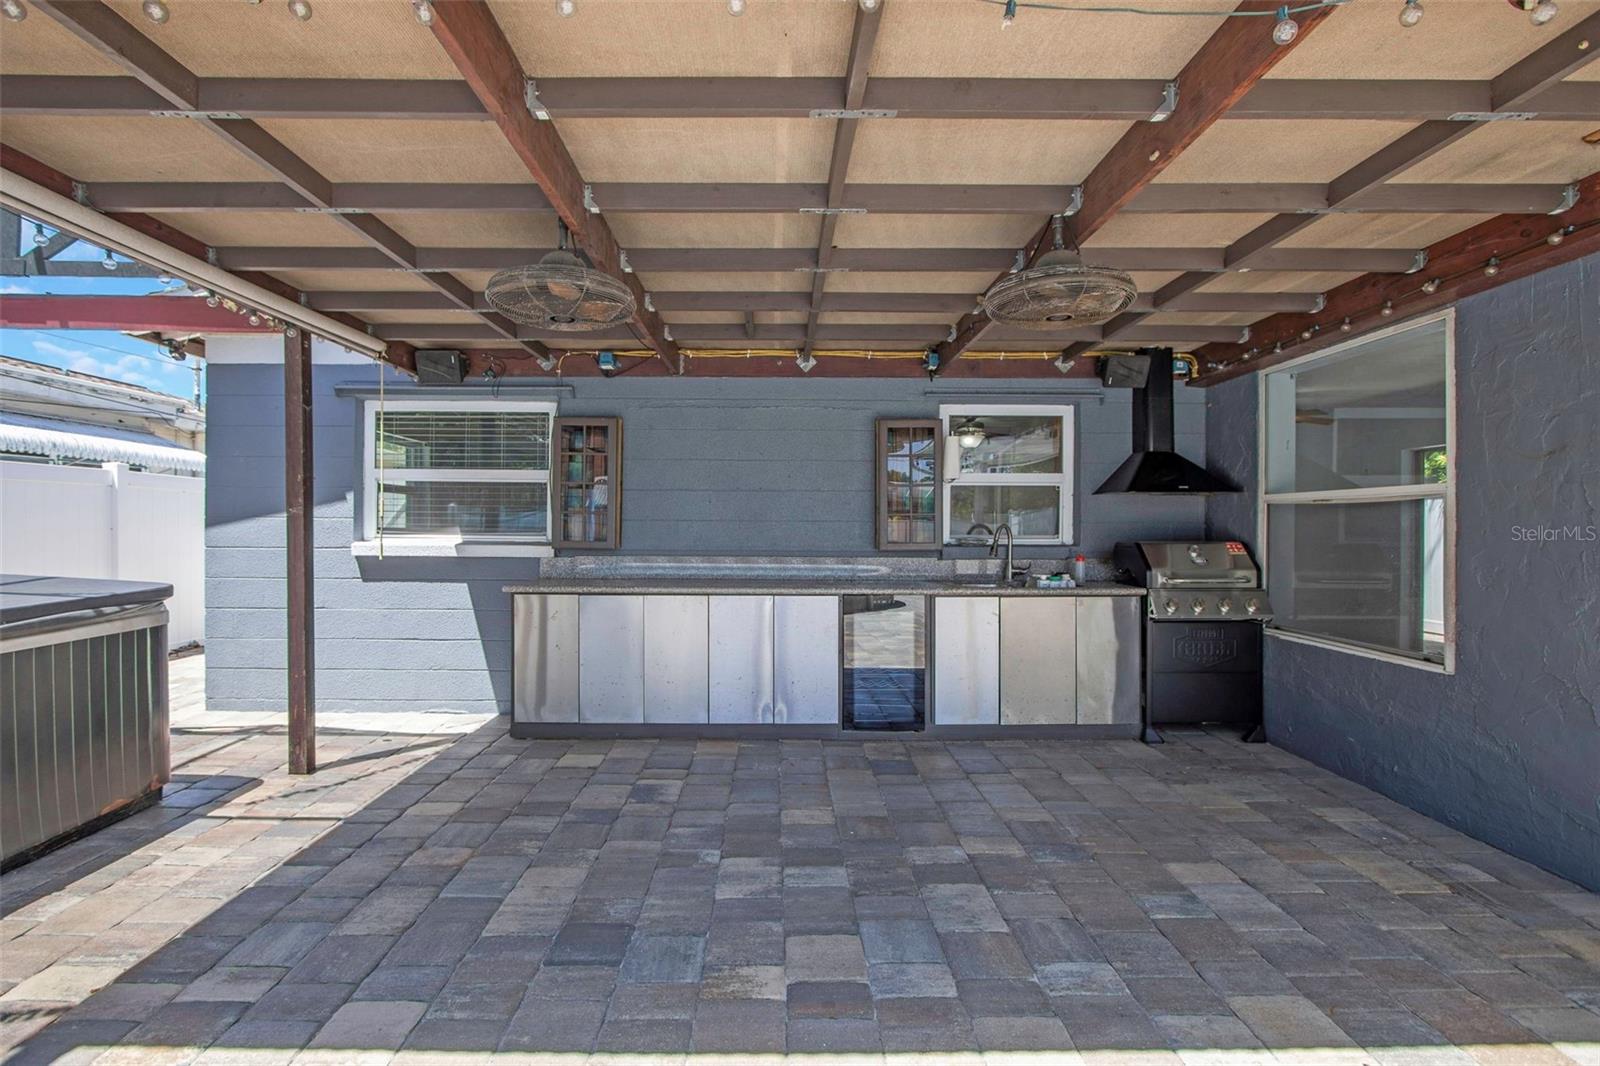 outdoor kitchen, wine cooler and NEW grill